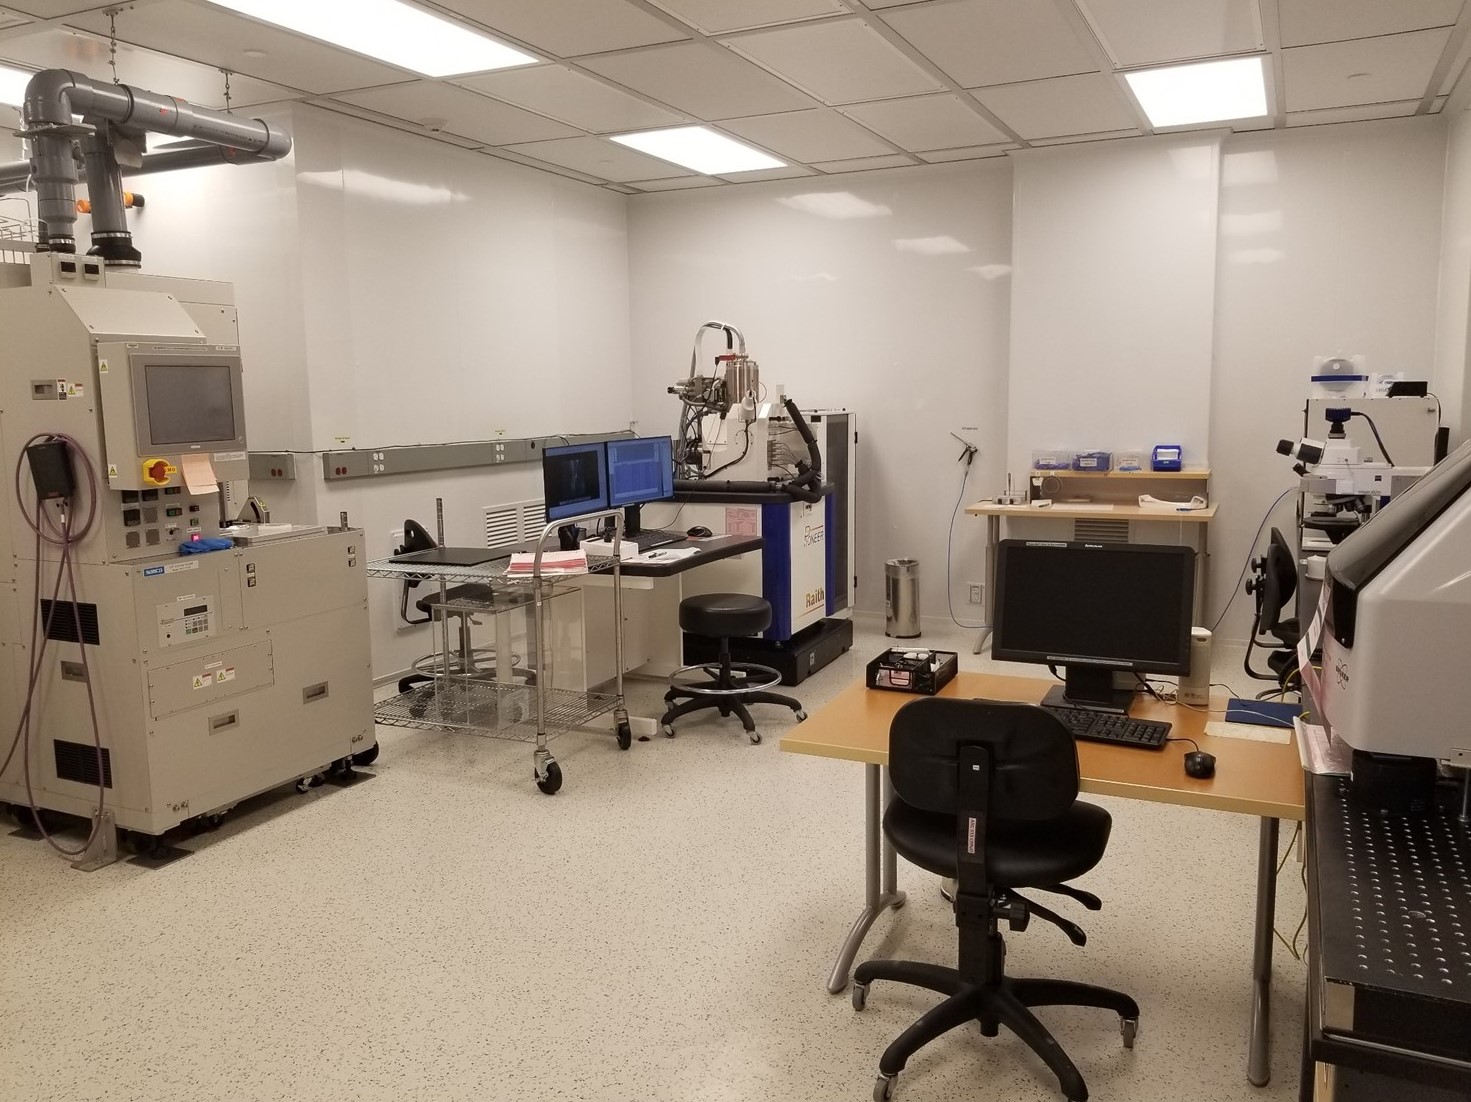 Various nanofabrication tools and chairs in a white lab environment